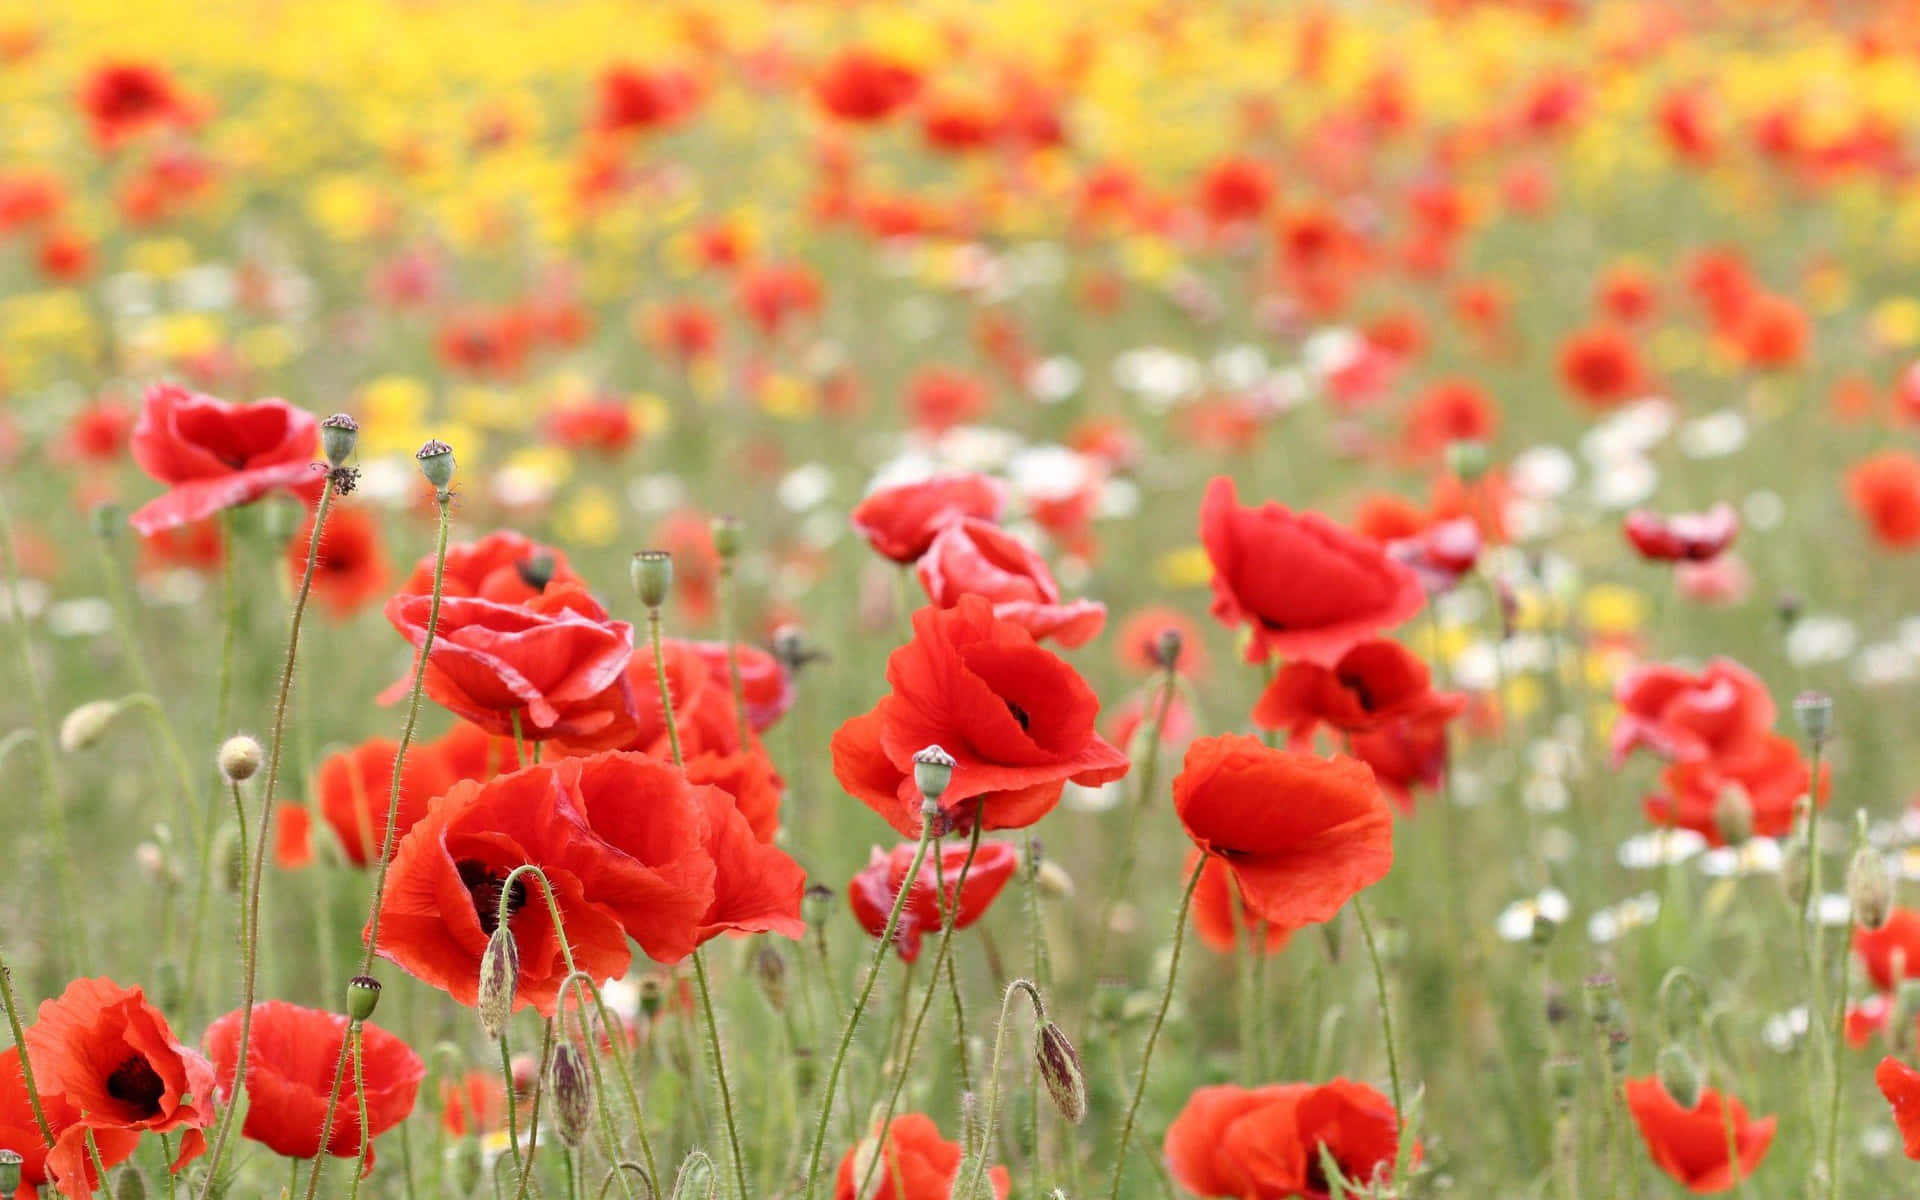 Gentle blooming of radiant red poppy flowers in a thriving, yet peaceful garden.